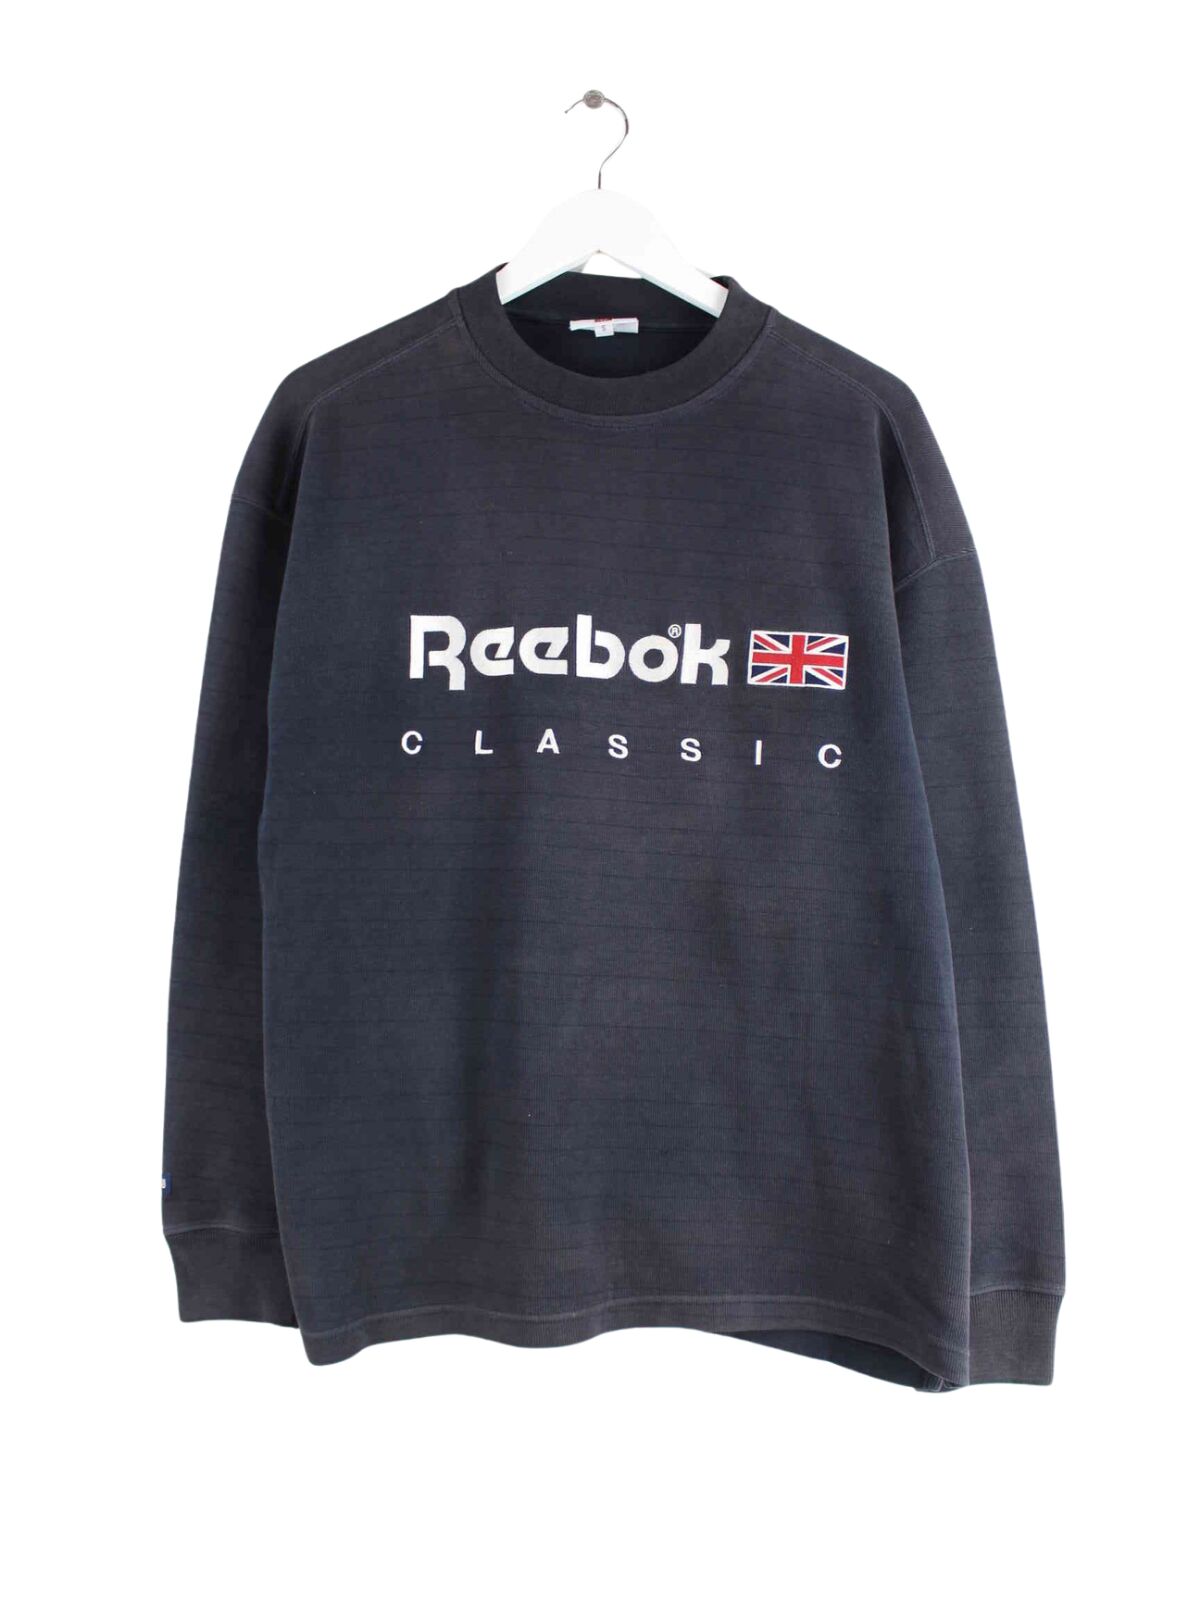 Reebok Embroidered Sweater Schwarz S (front image)